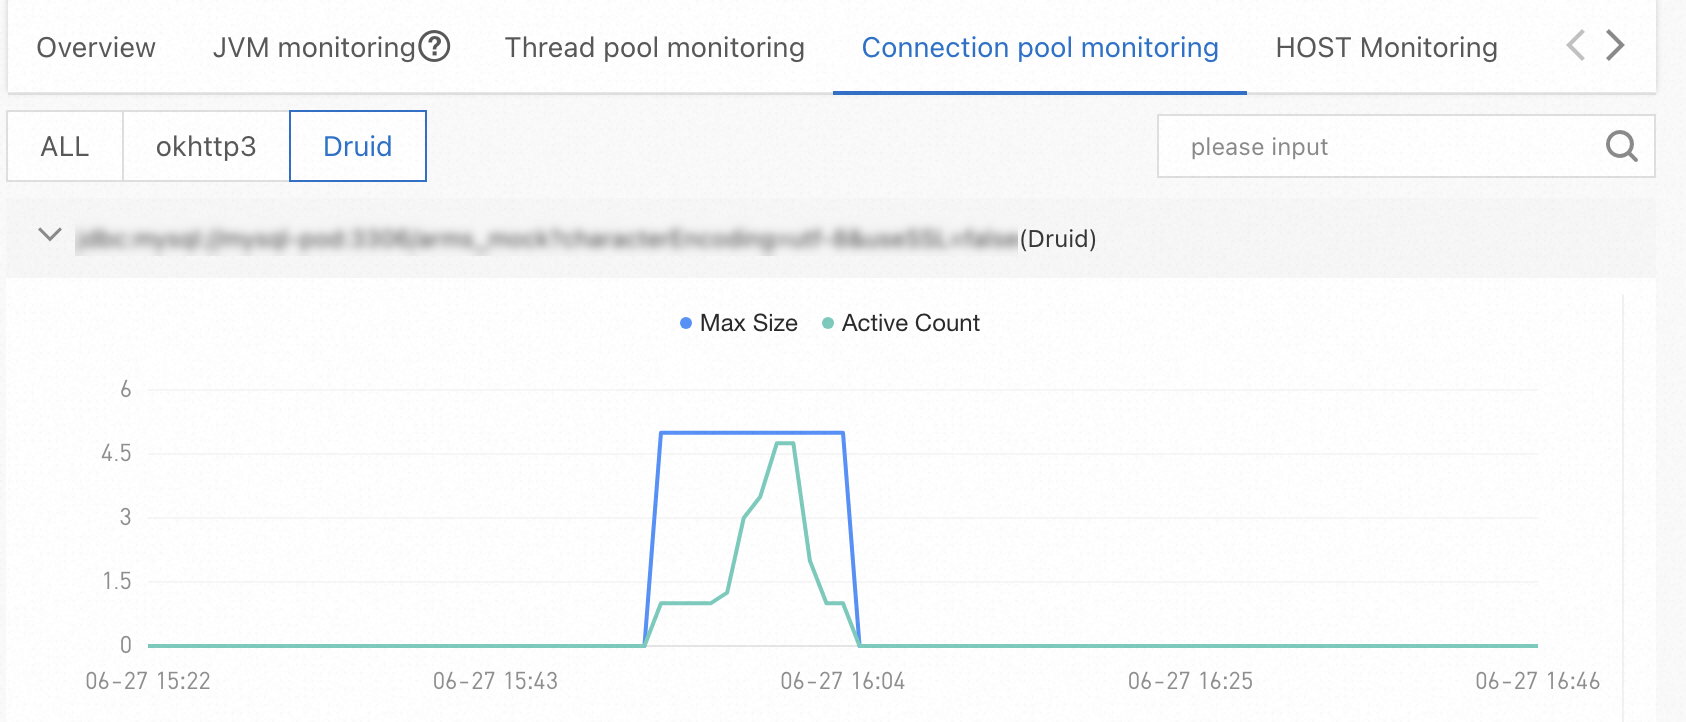 Connection pool monitoring